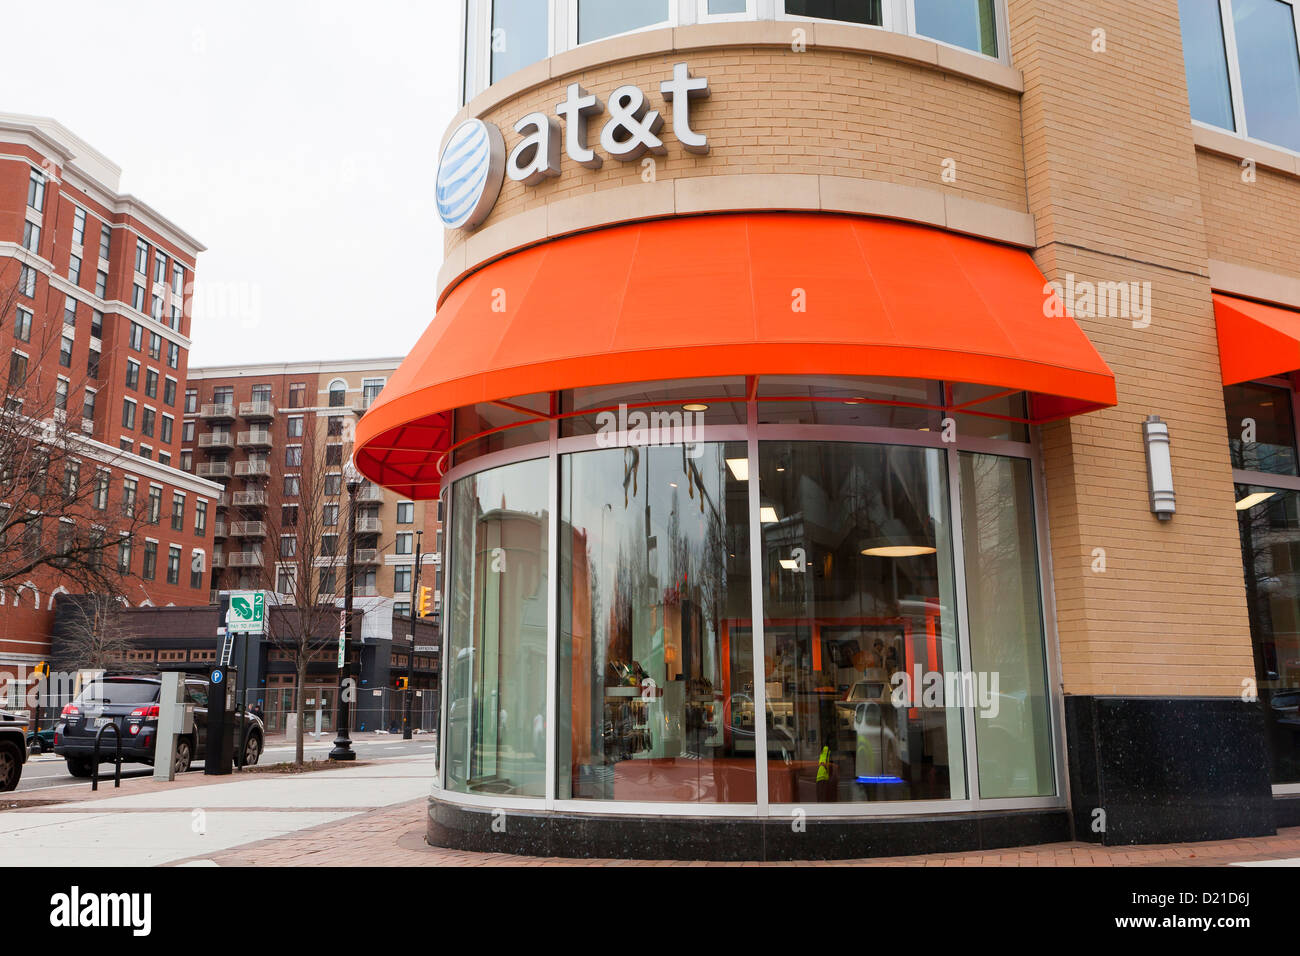 AT&T mobile phone storefront Stock Photo